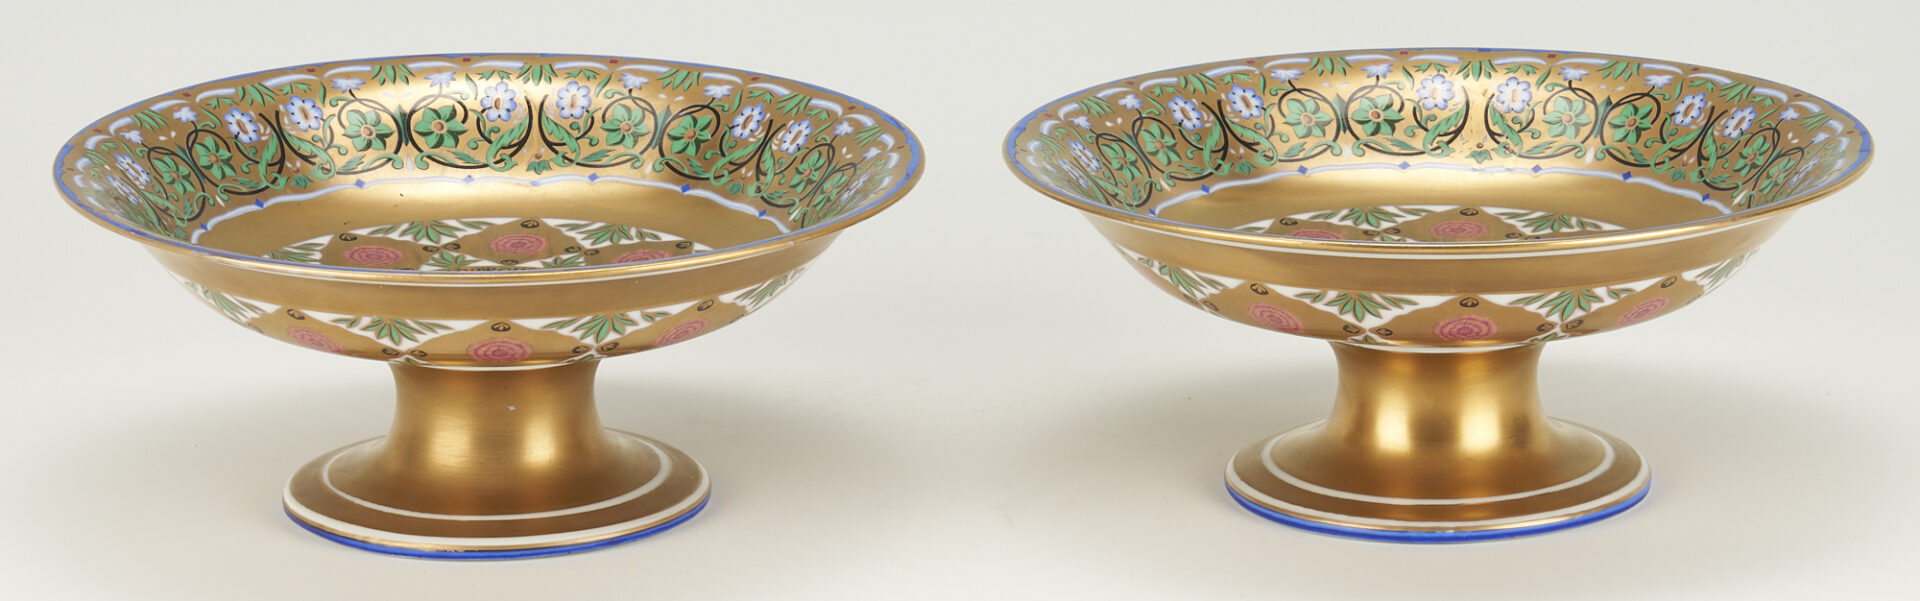 Lot 270: Russian Imperial Porcelain, 2 Tazzas & 2 Plates